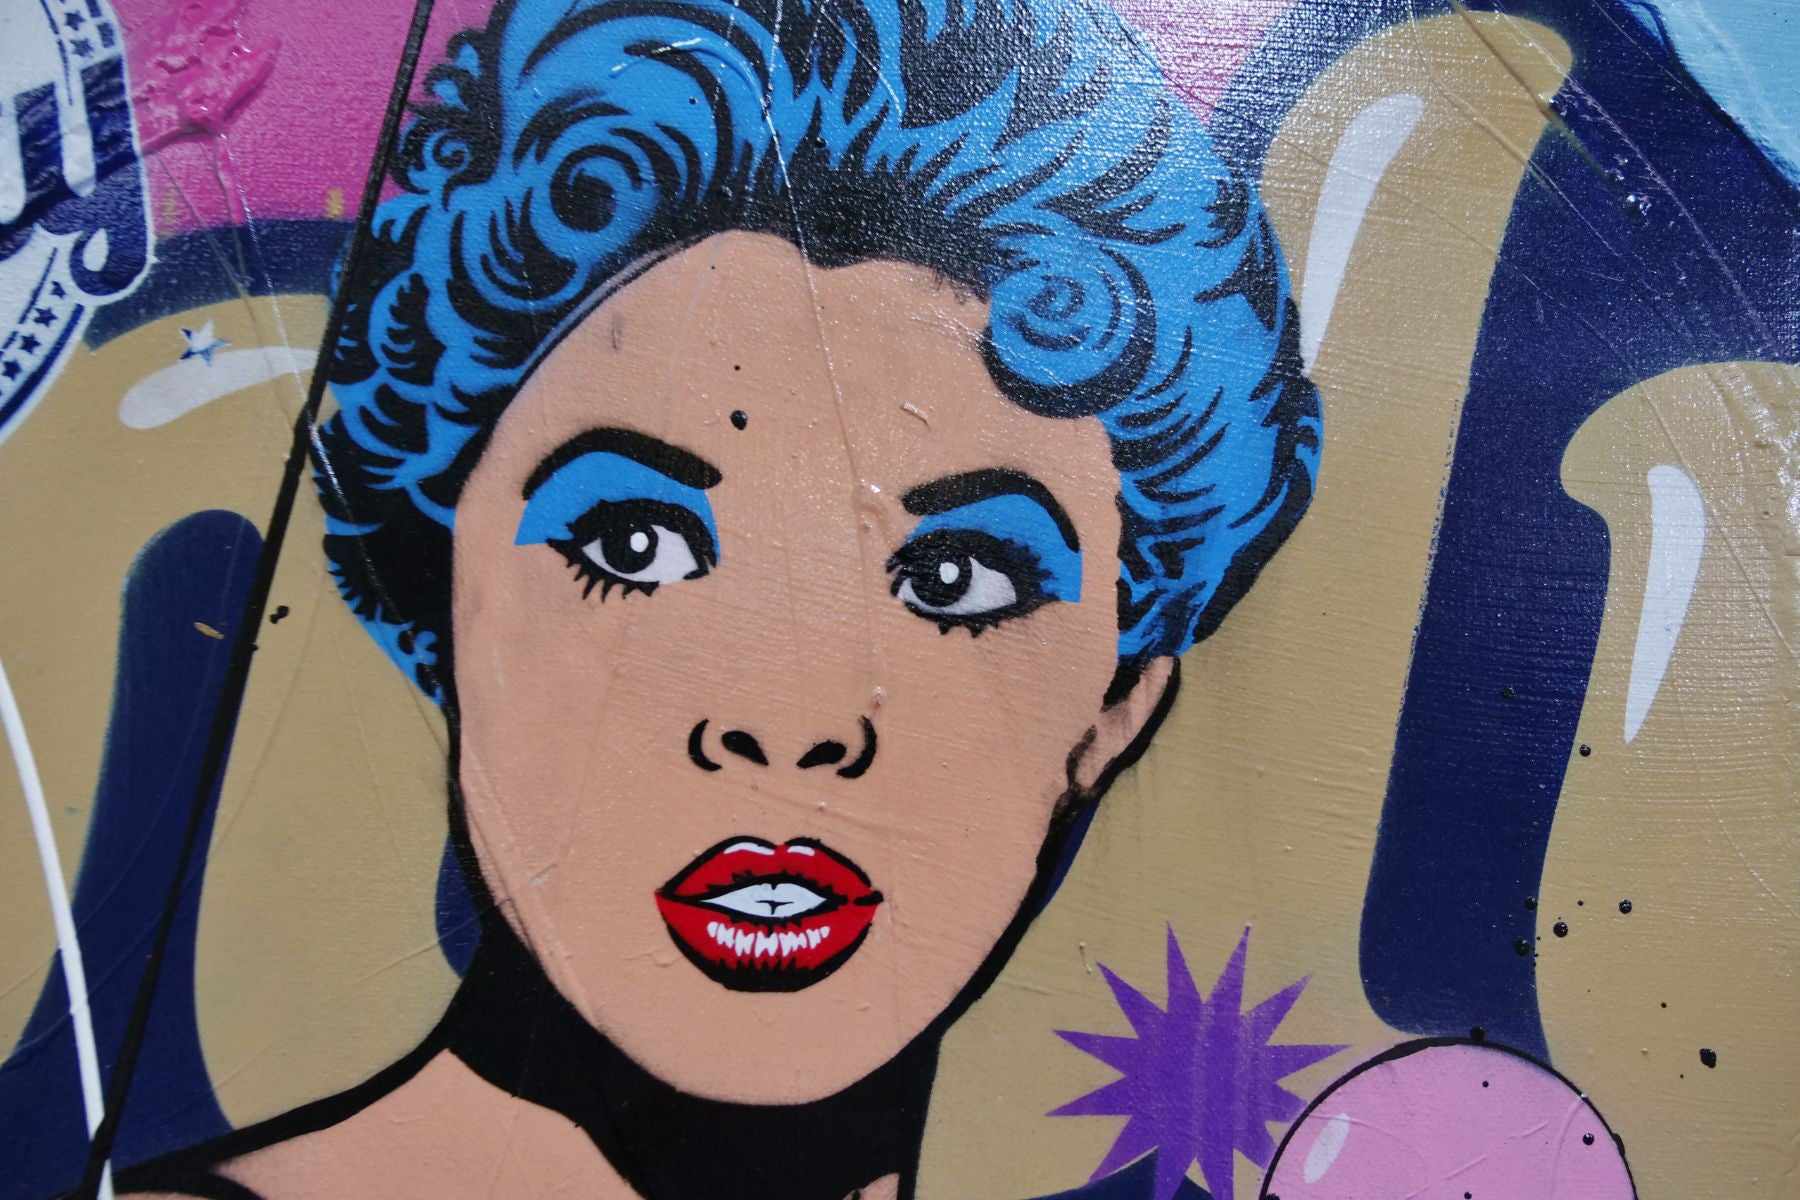 Candy's New Love 240cm x 120cm Candy Barr Textured Urban Pop Art Painting (SOLD)